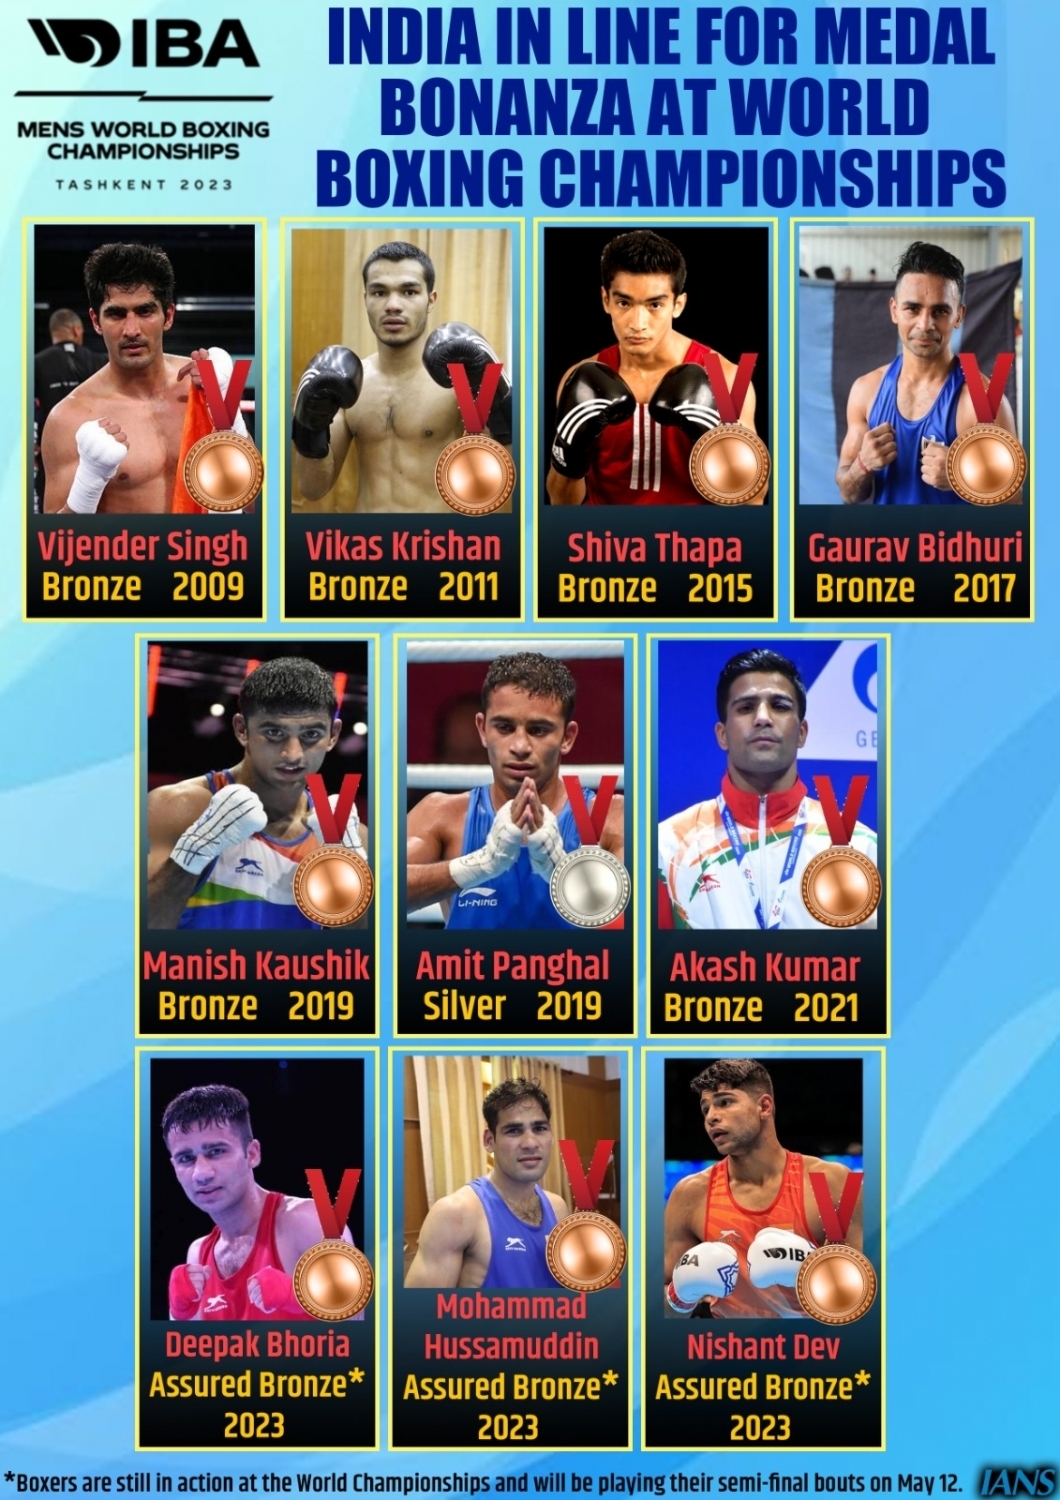 india 3 medals assured in world boxing championship